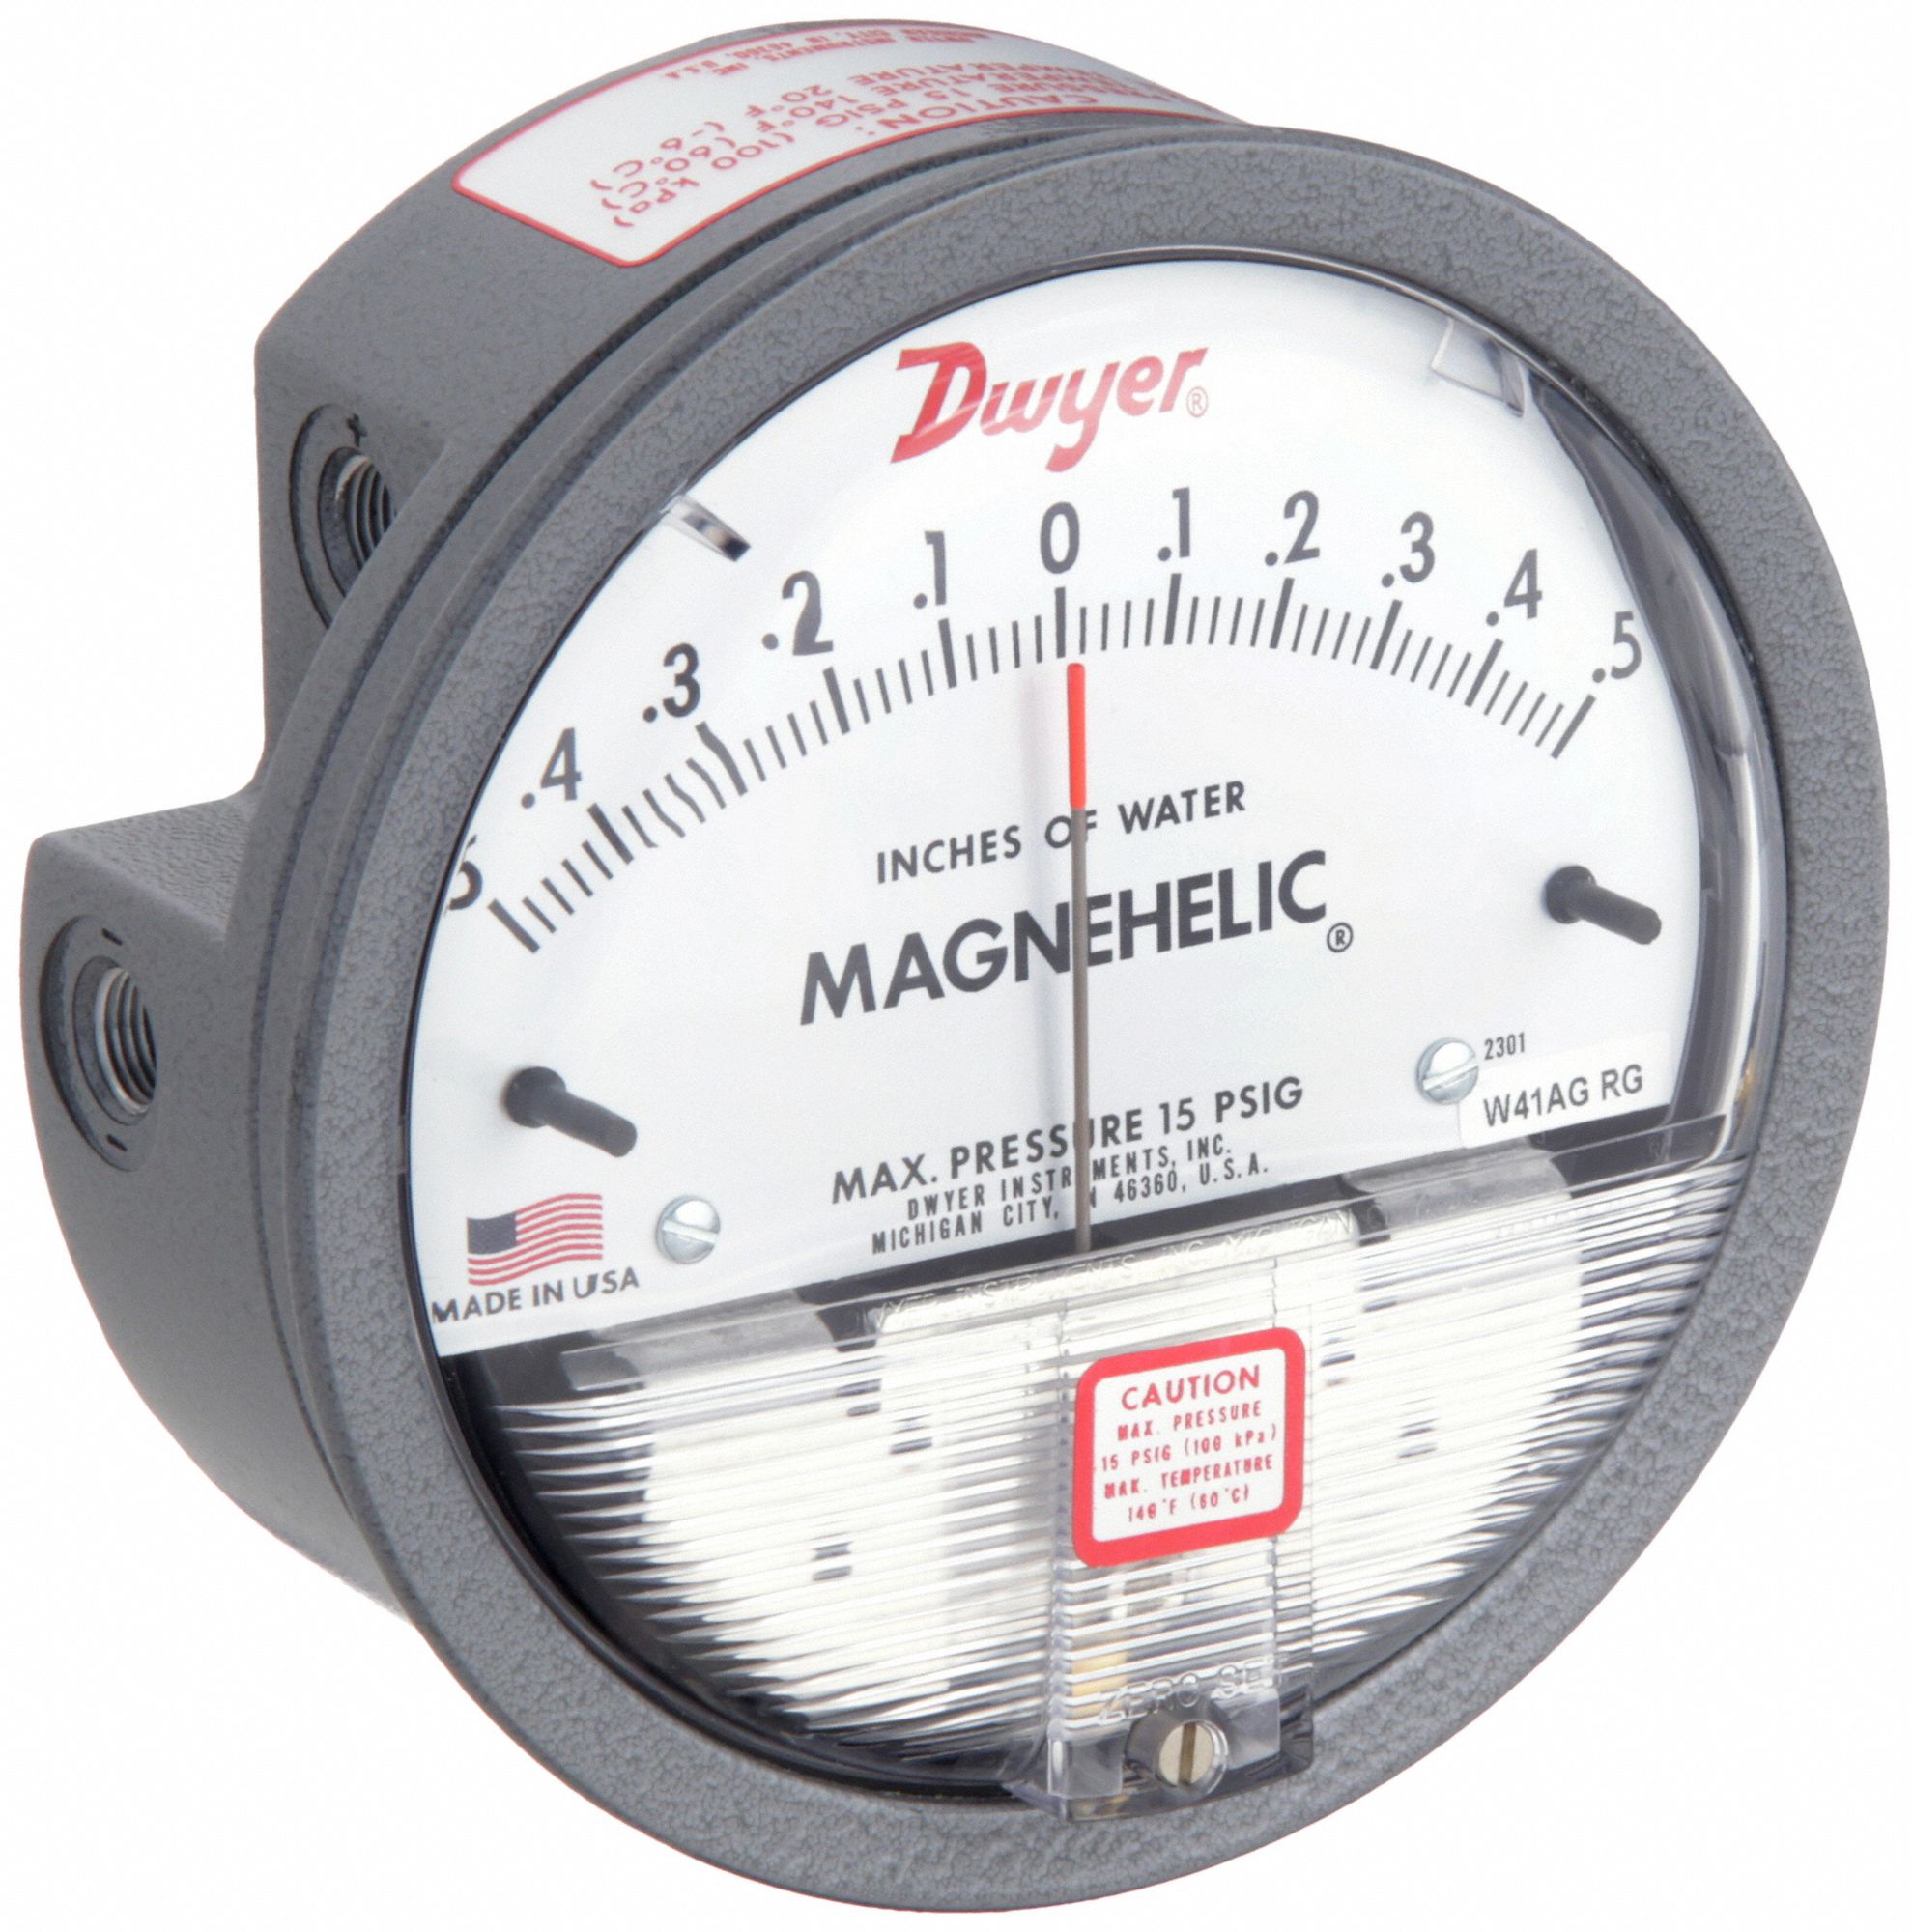 DWYER, 0.5 to 0 to 0.5 in wc, Dual Single-Side or Back, Differential  Pressure Gauge - 55EH76|2301 - Grainger